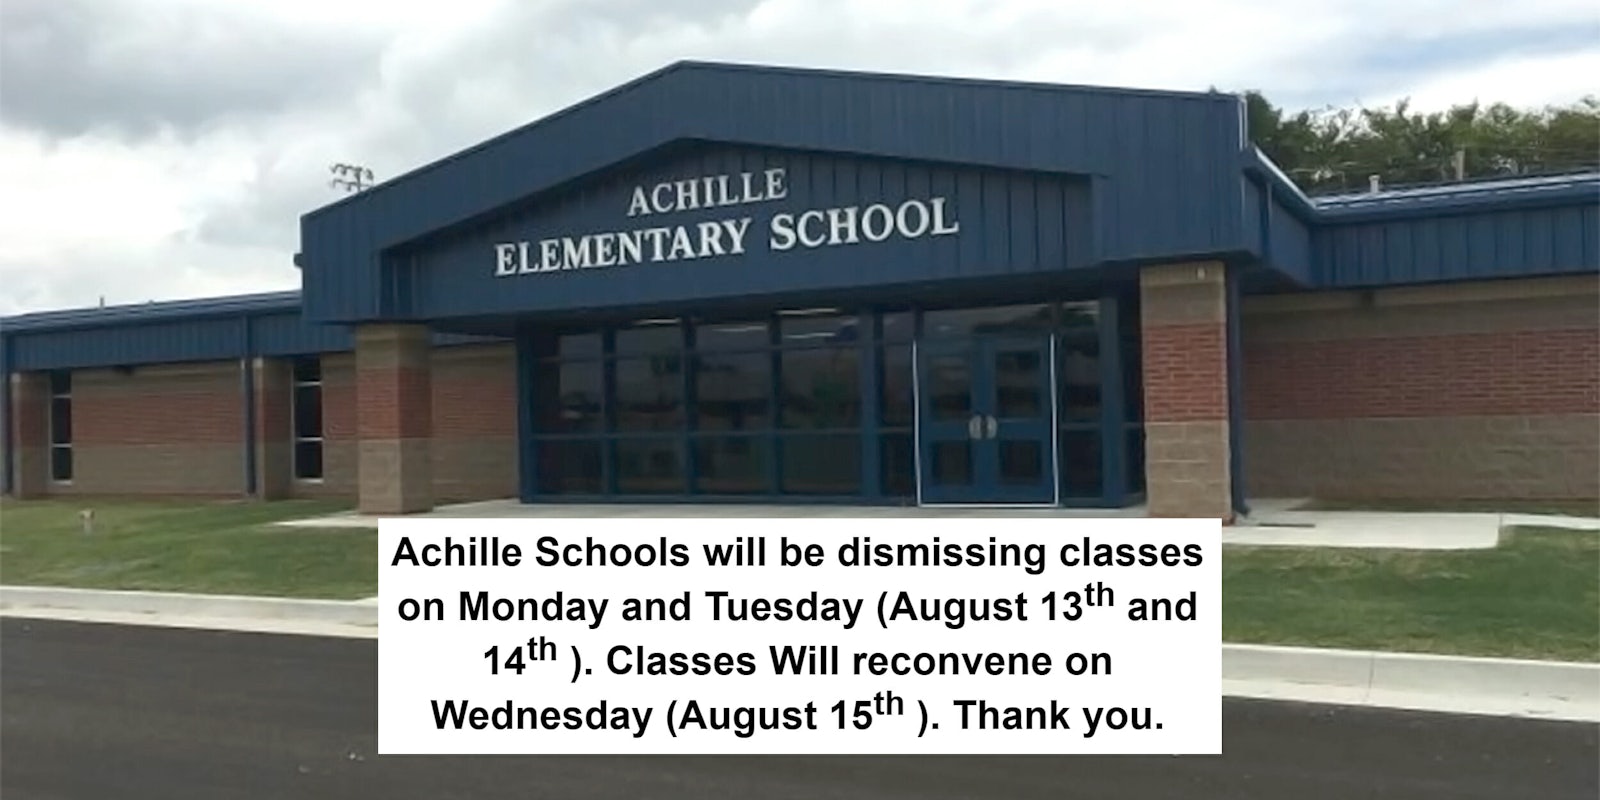 achille elementary school dismisses classes for a week due to threats toward transgender student